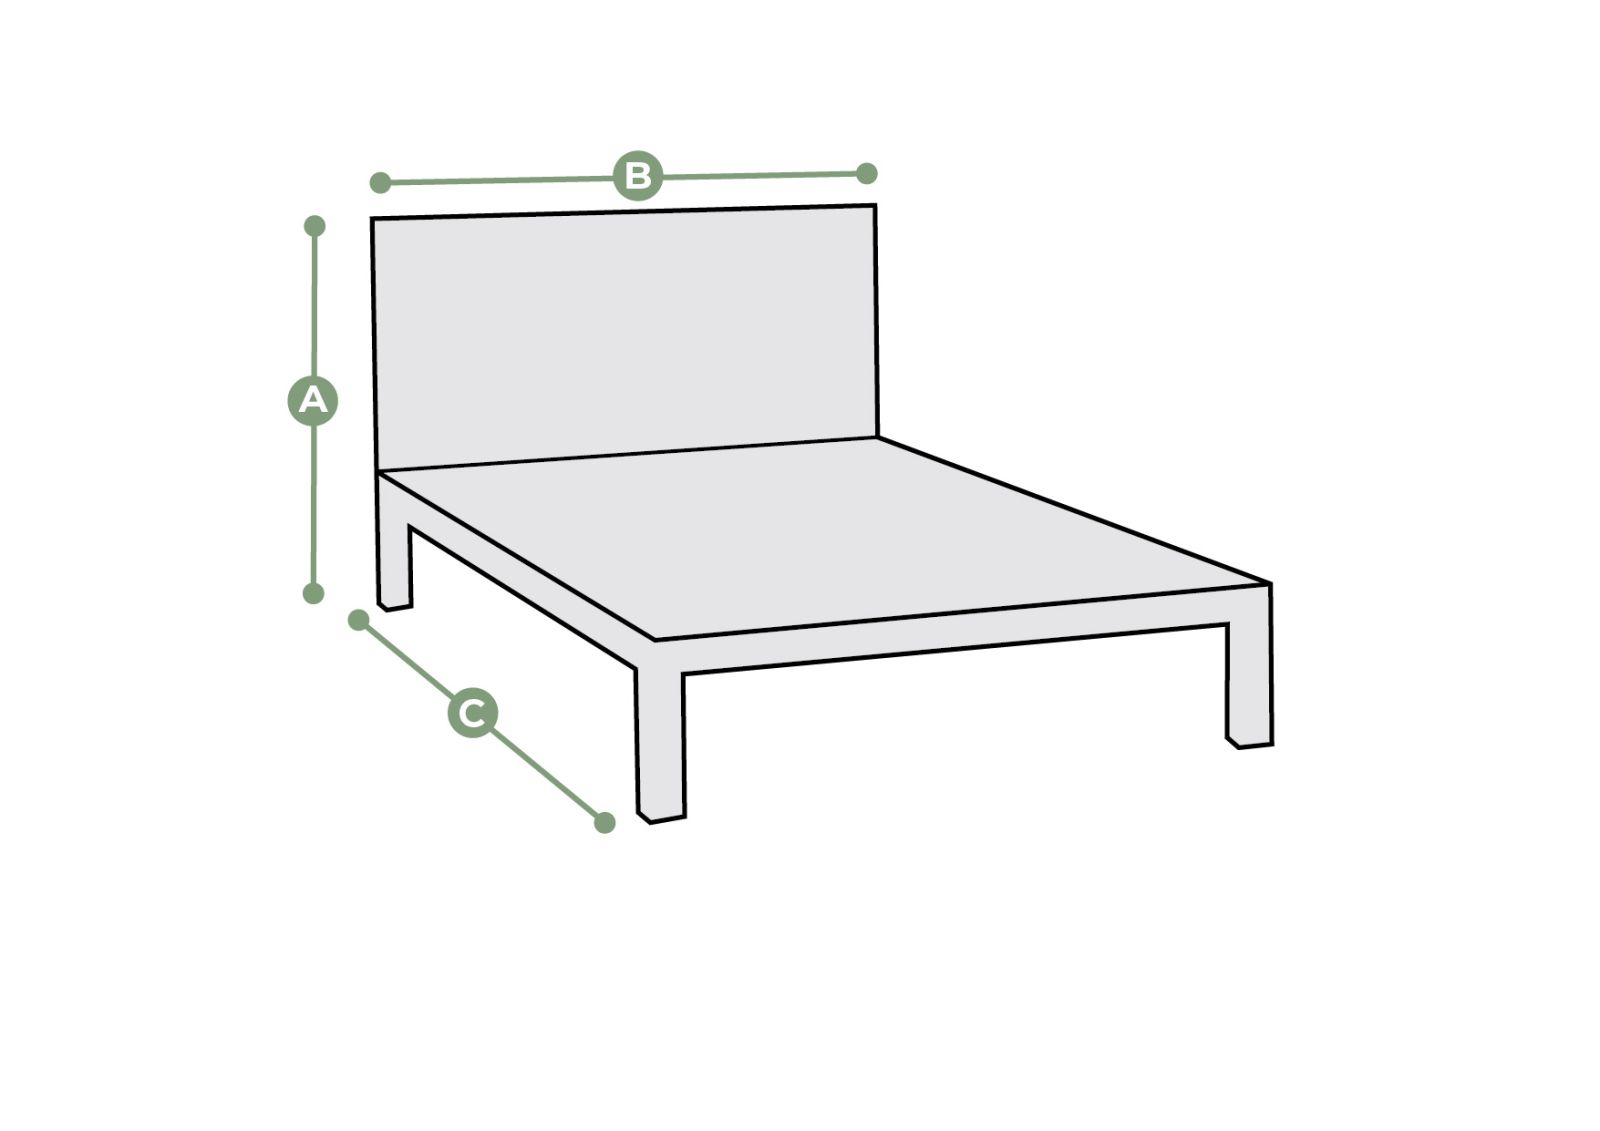 Durham King-size Bed Dimensions